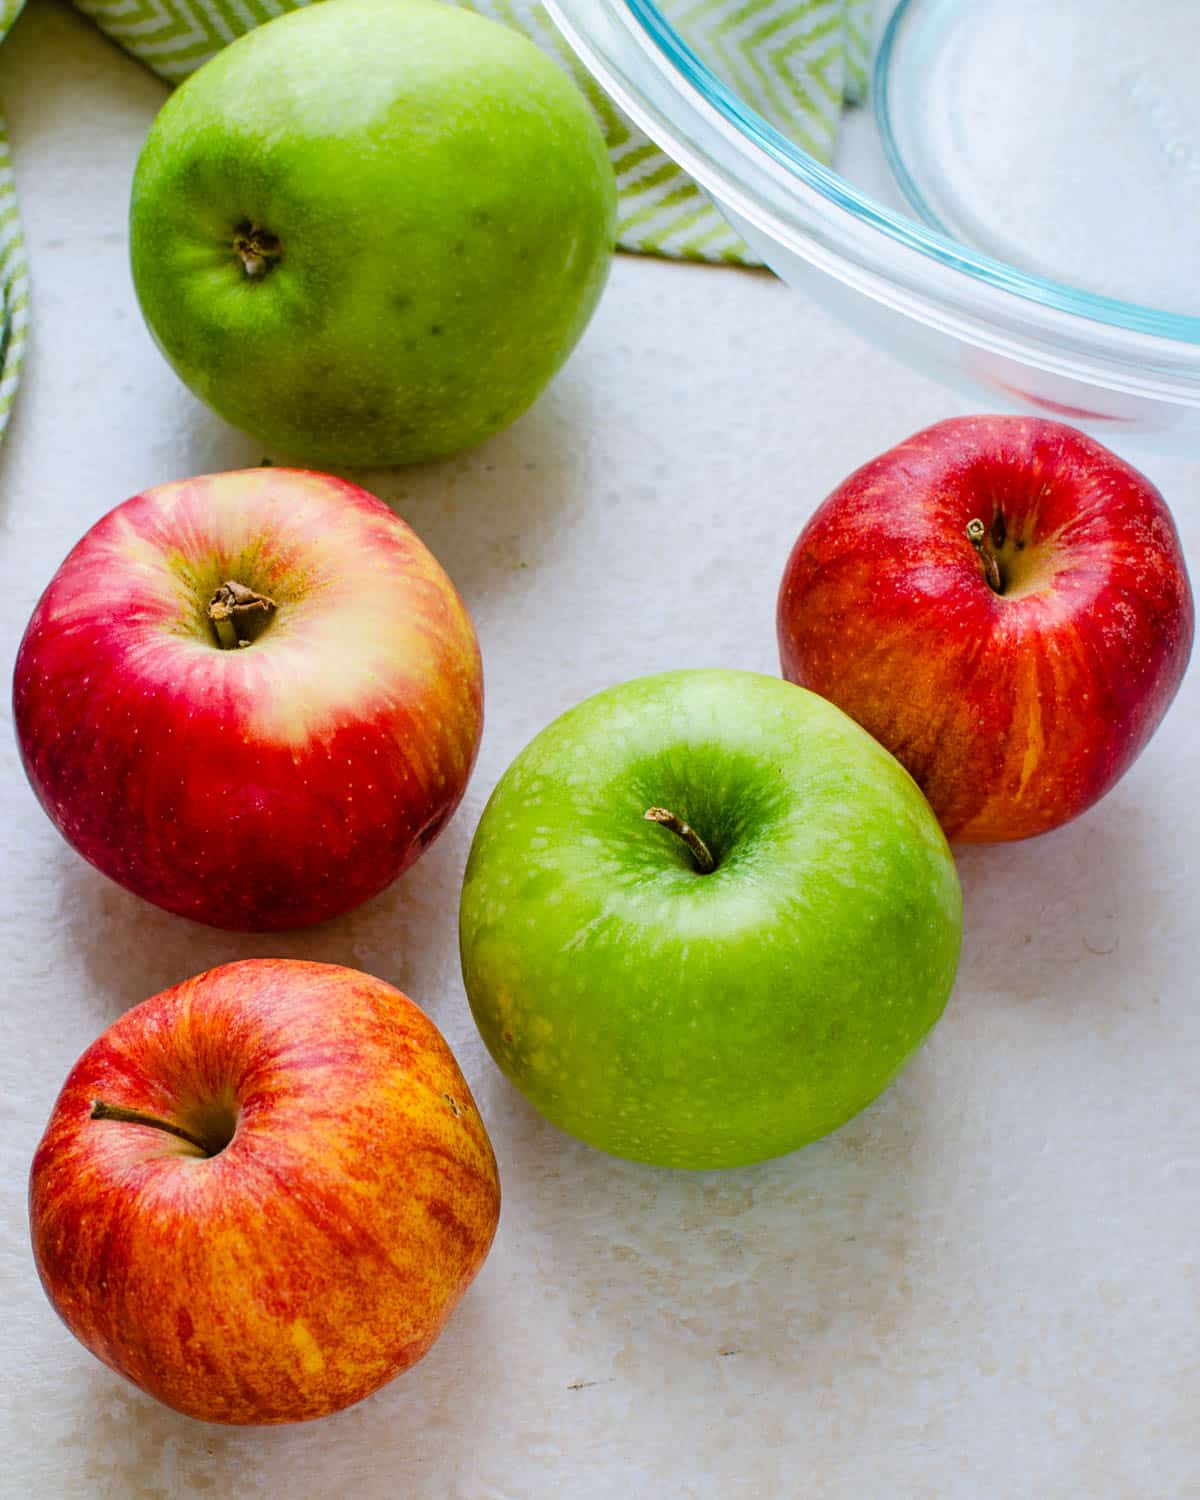 A variety of apples for the crisp recipe.